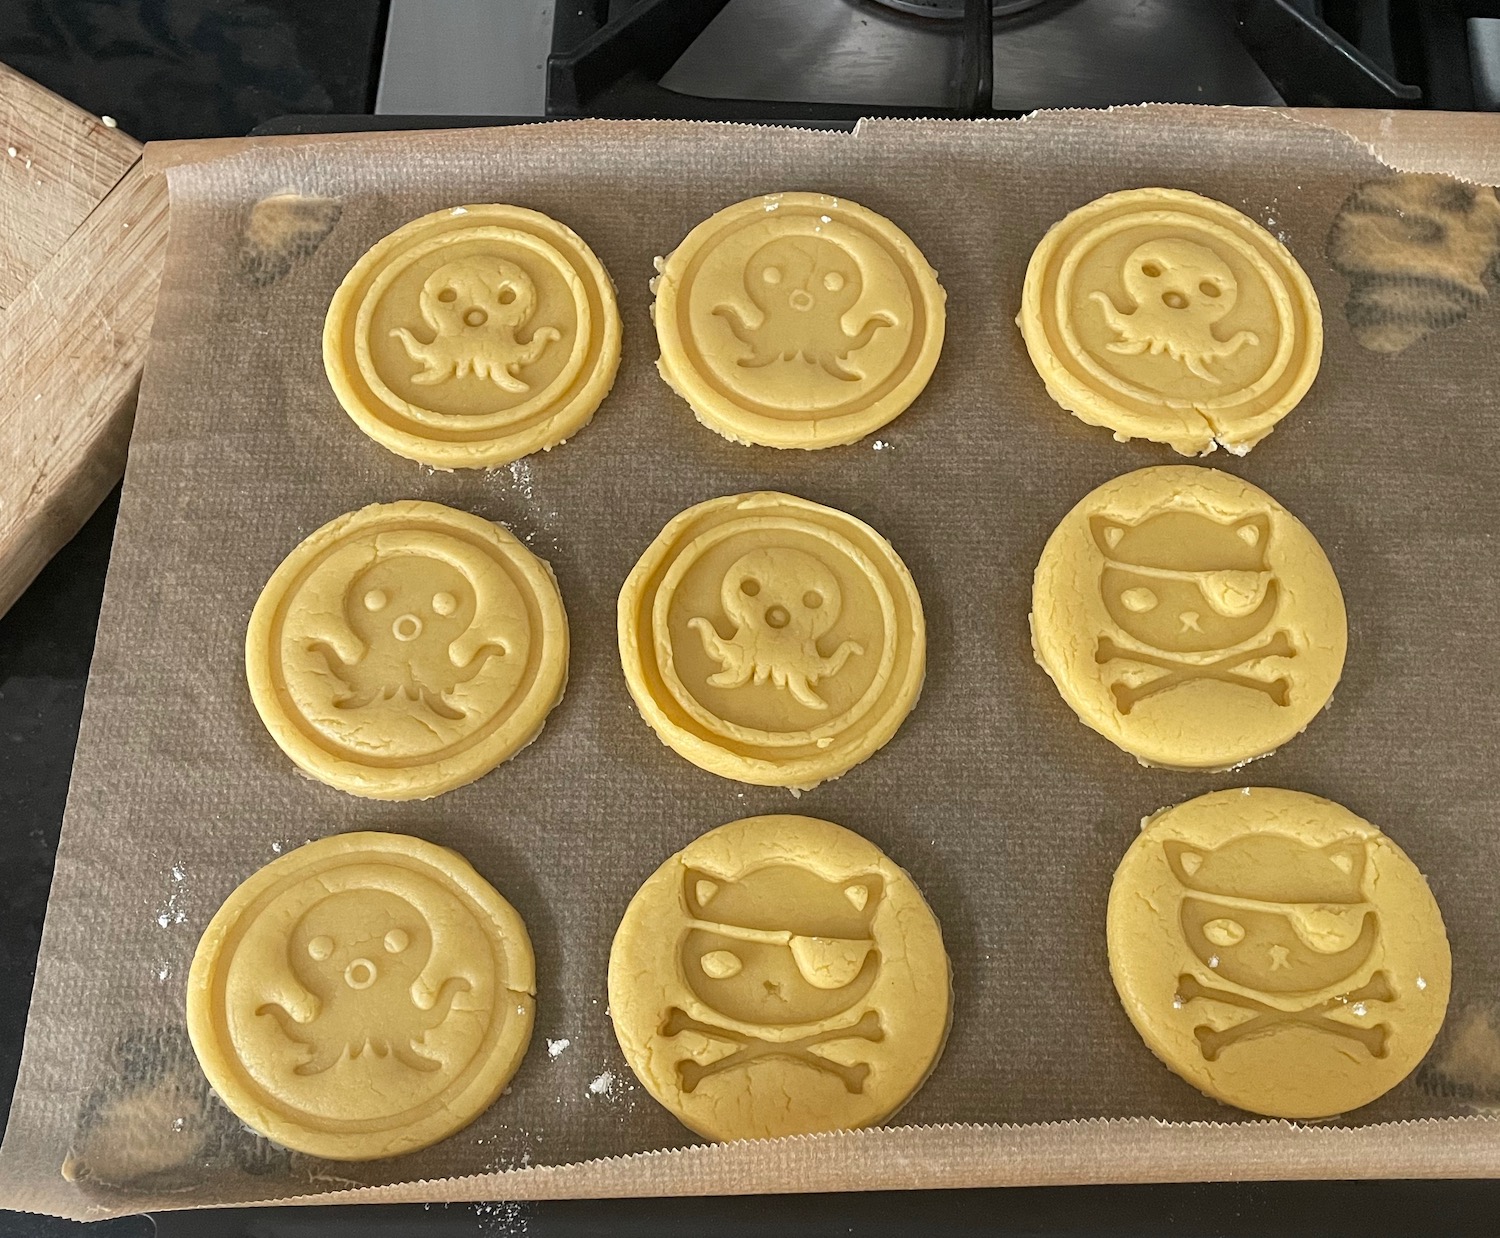 Octonauts themed cookies I made with my daughter. Explore! Rescue! Protect!